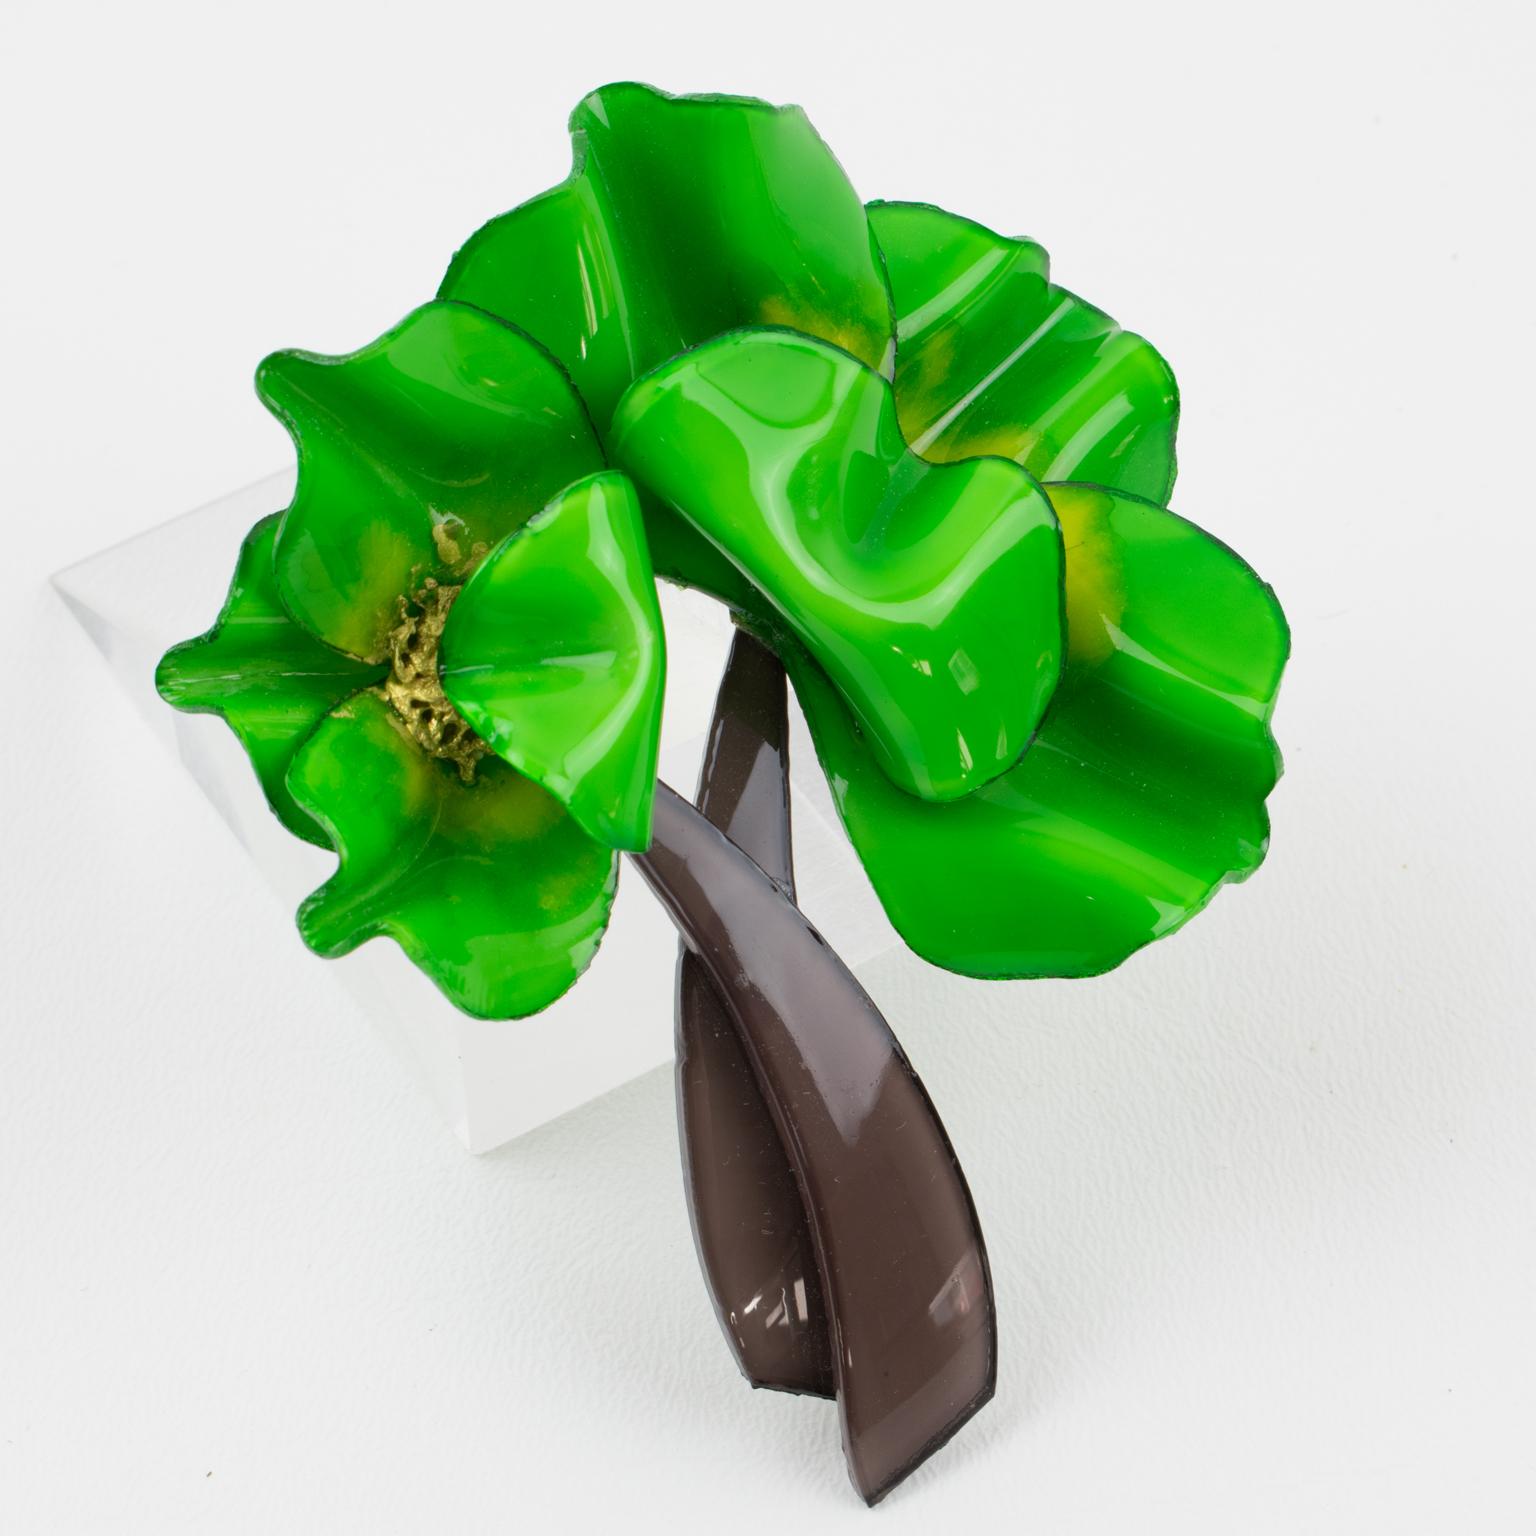 Charming dimensional oversized pin brooch by Cilea Paris. Floral-inspired hand-made artisanal resin pin brooch featuring poppy flowers with textured patterns build together to form a powerful statement piece. Vivid fresh green and taupe brown